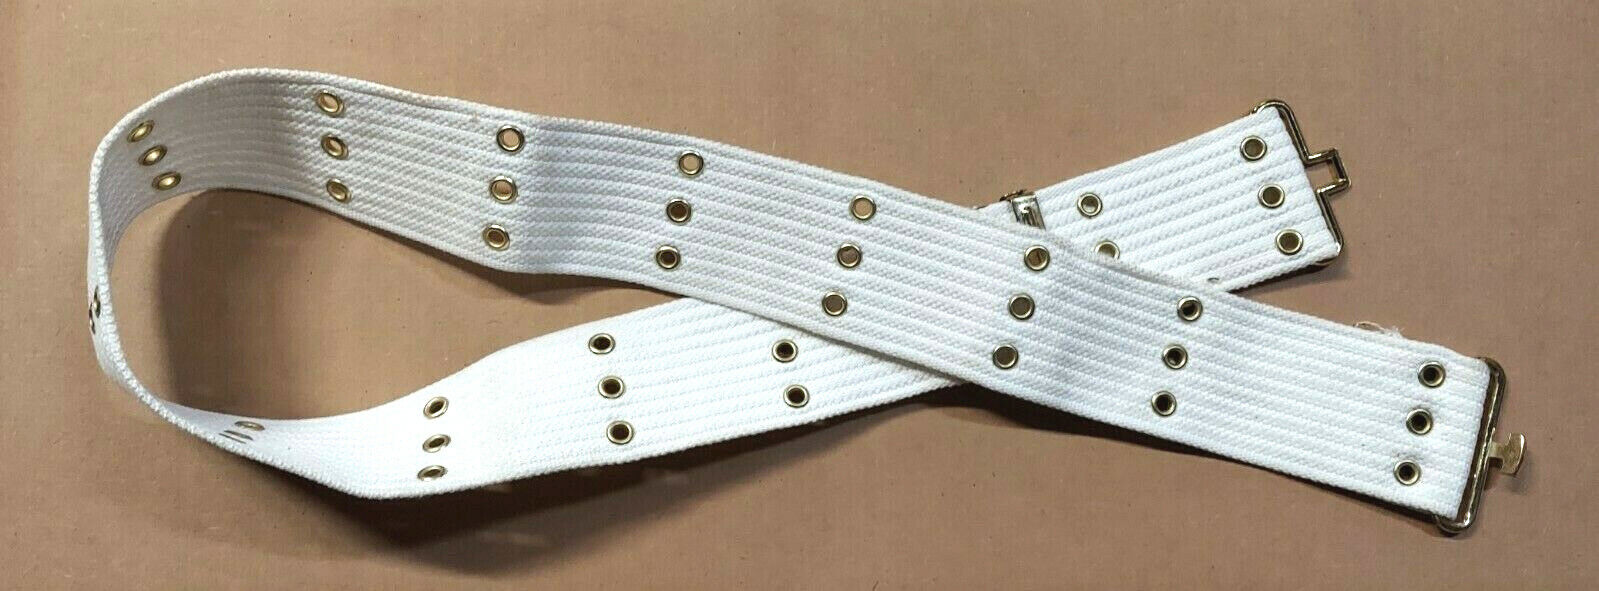 White Military Style Parade Canvas Pistol Belt 44in Adjustable Made in Taiwan